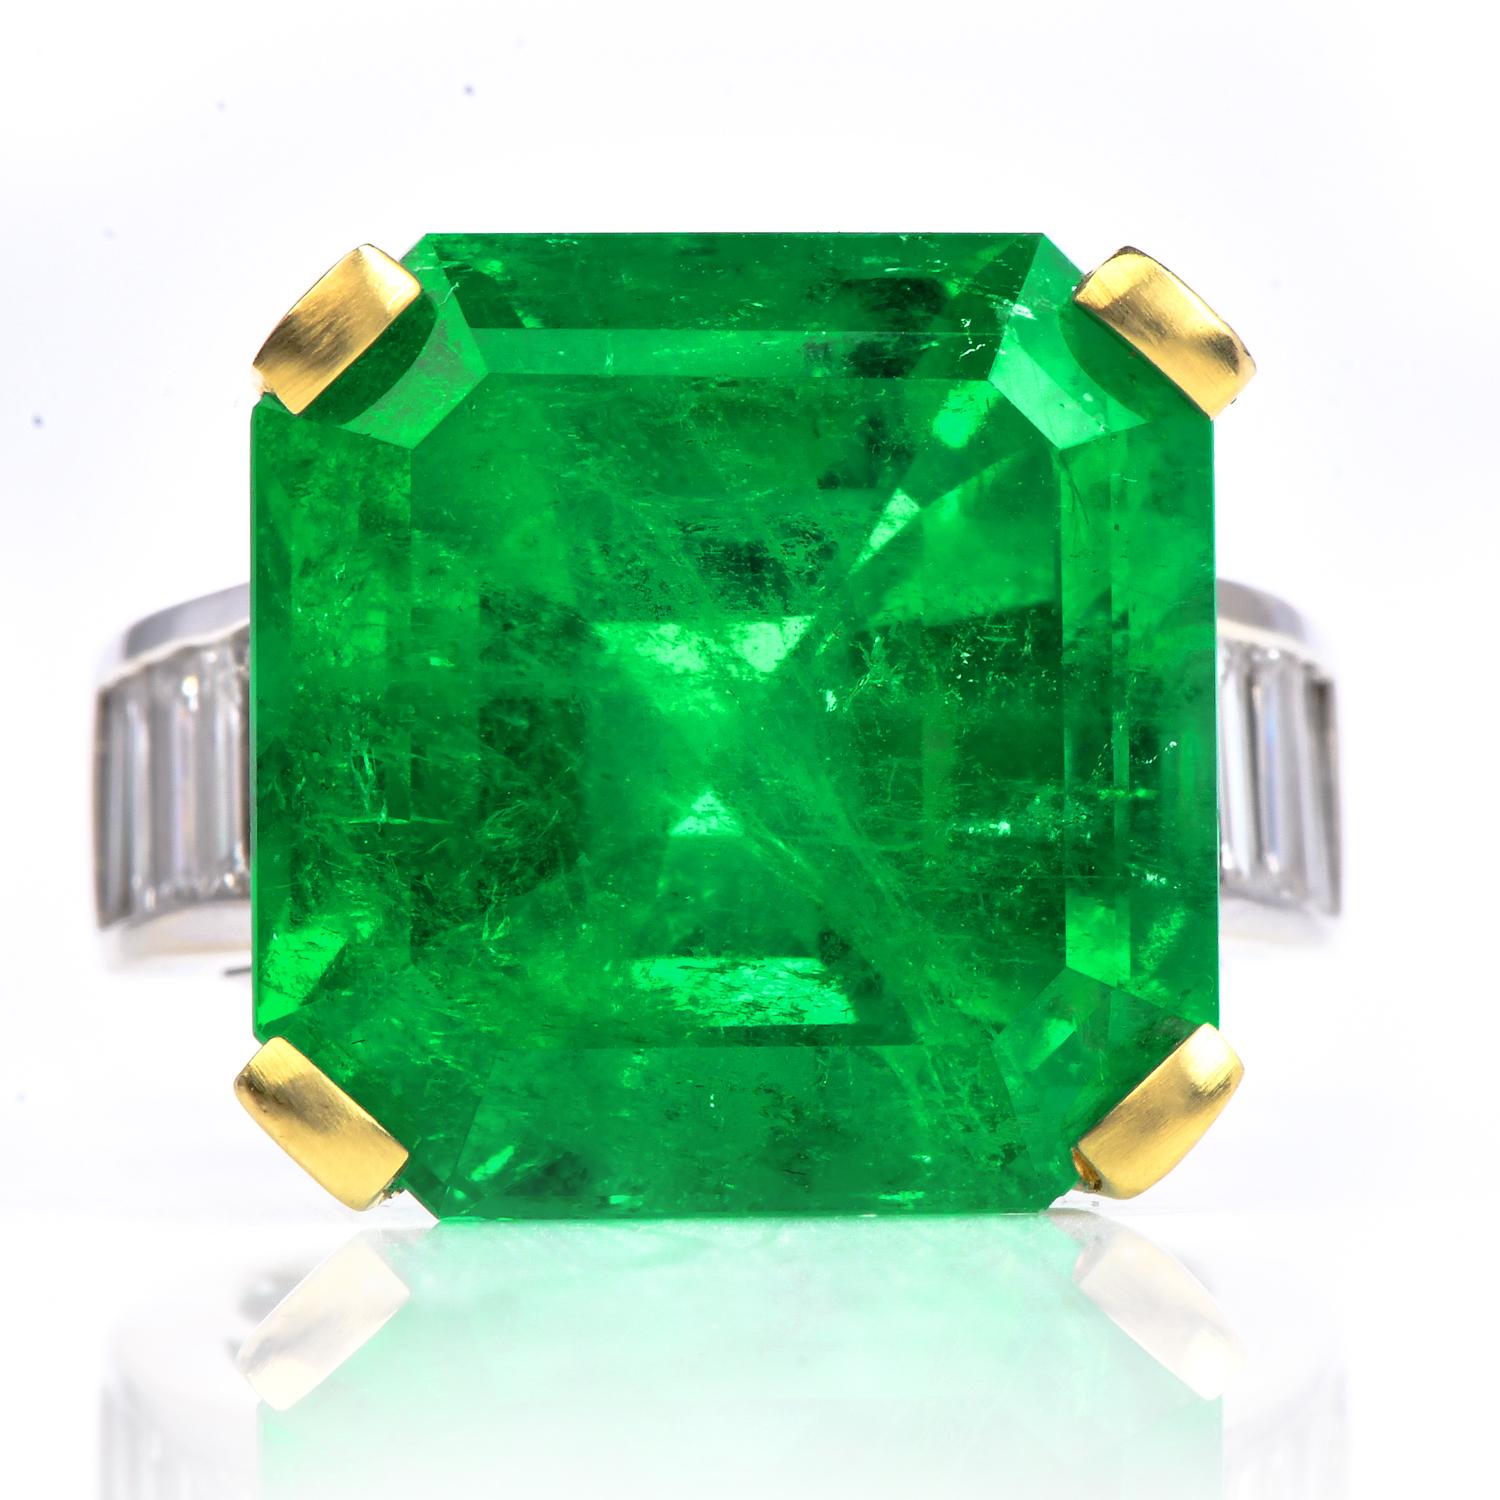 Treat yourself to this irresistibly stunning Diamond 8.64 carat Colombian Emerald 18K Gold Large Cocktail Ring! 

Crafted in platinum and 18K yellow and white gold, the center is Deep Green Rare Colombian Emerald of approximately 19.60 carats,